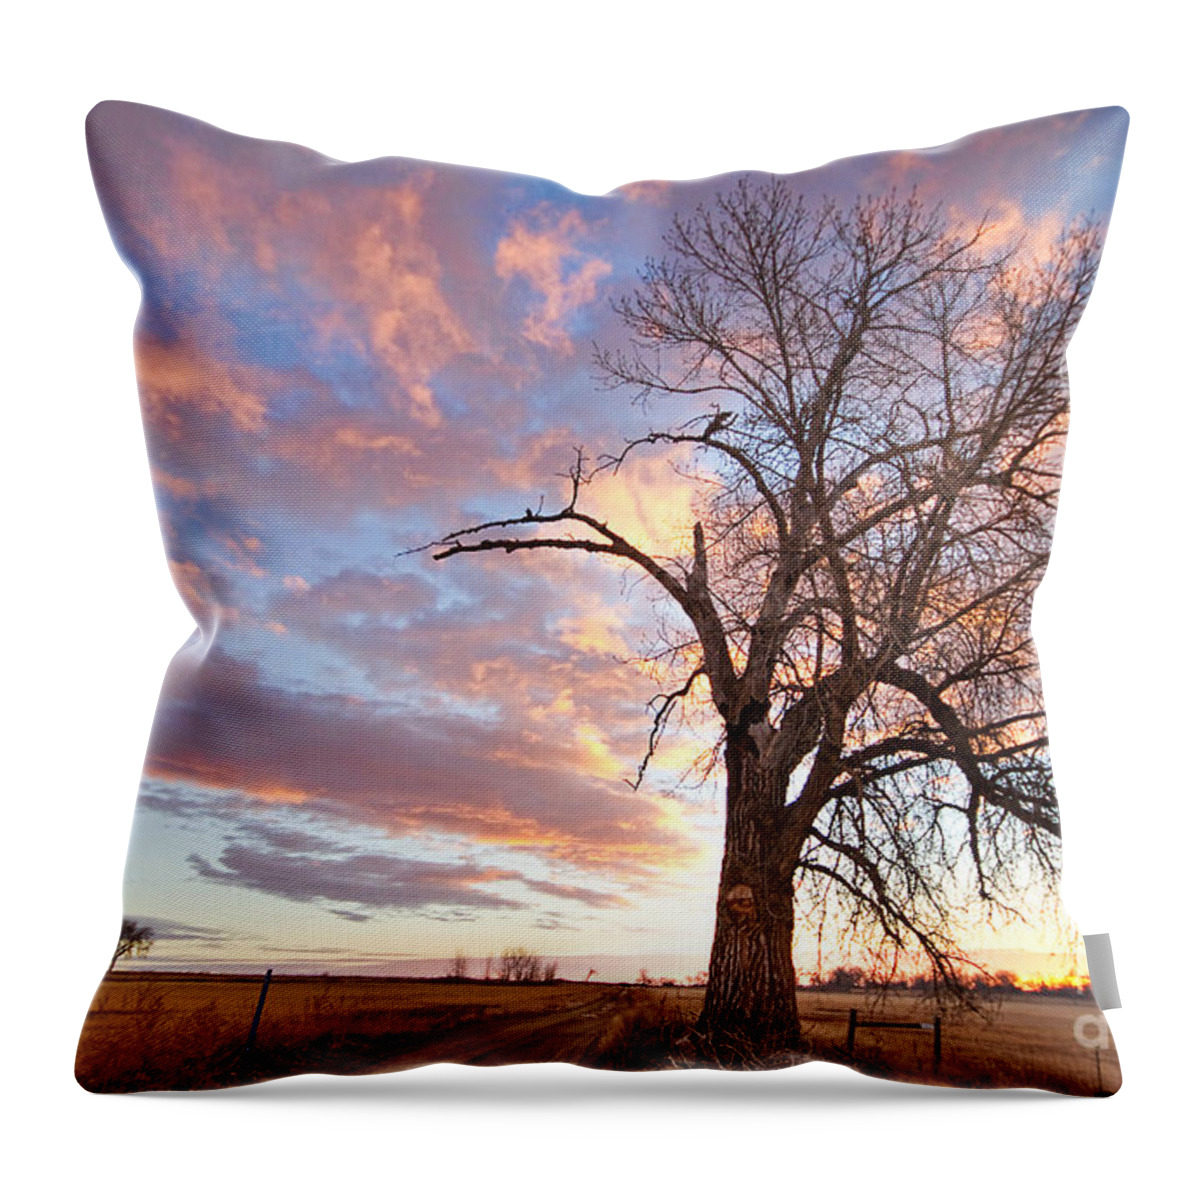 Sunrise Throw Pillow featuring the photograph Country Morning High by James BO Insogna